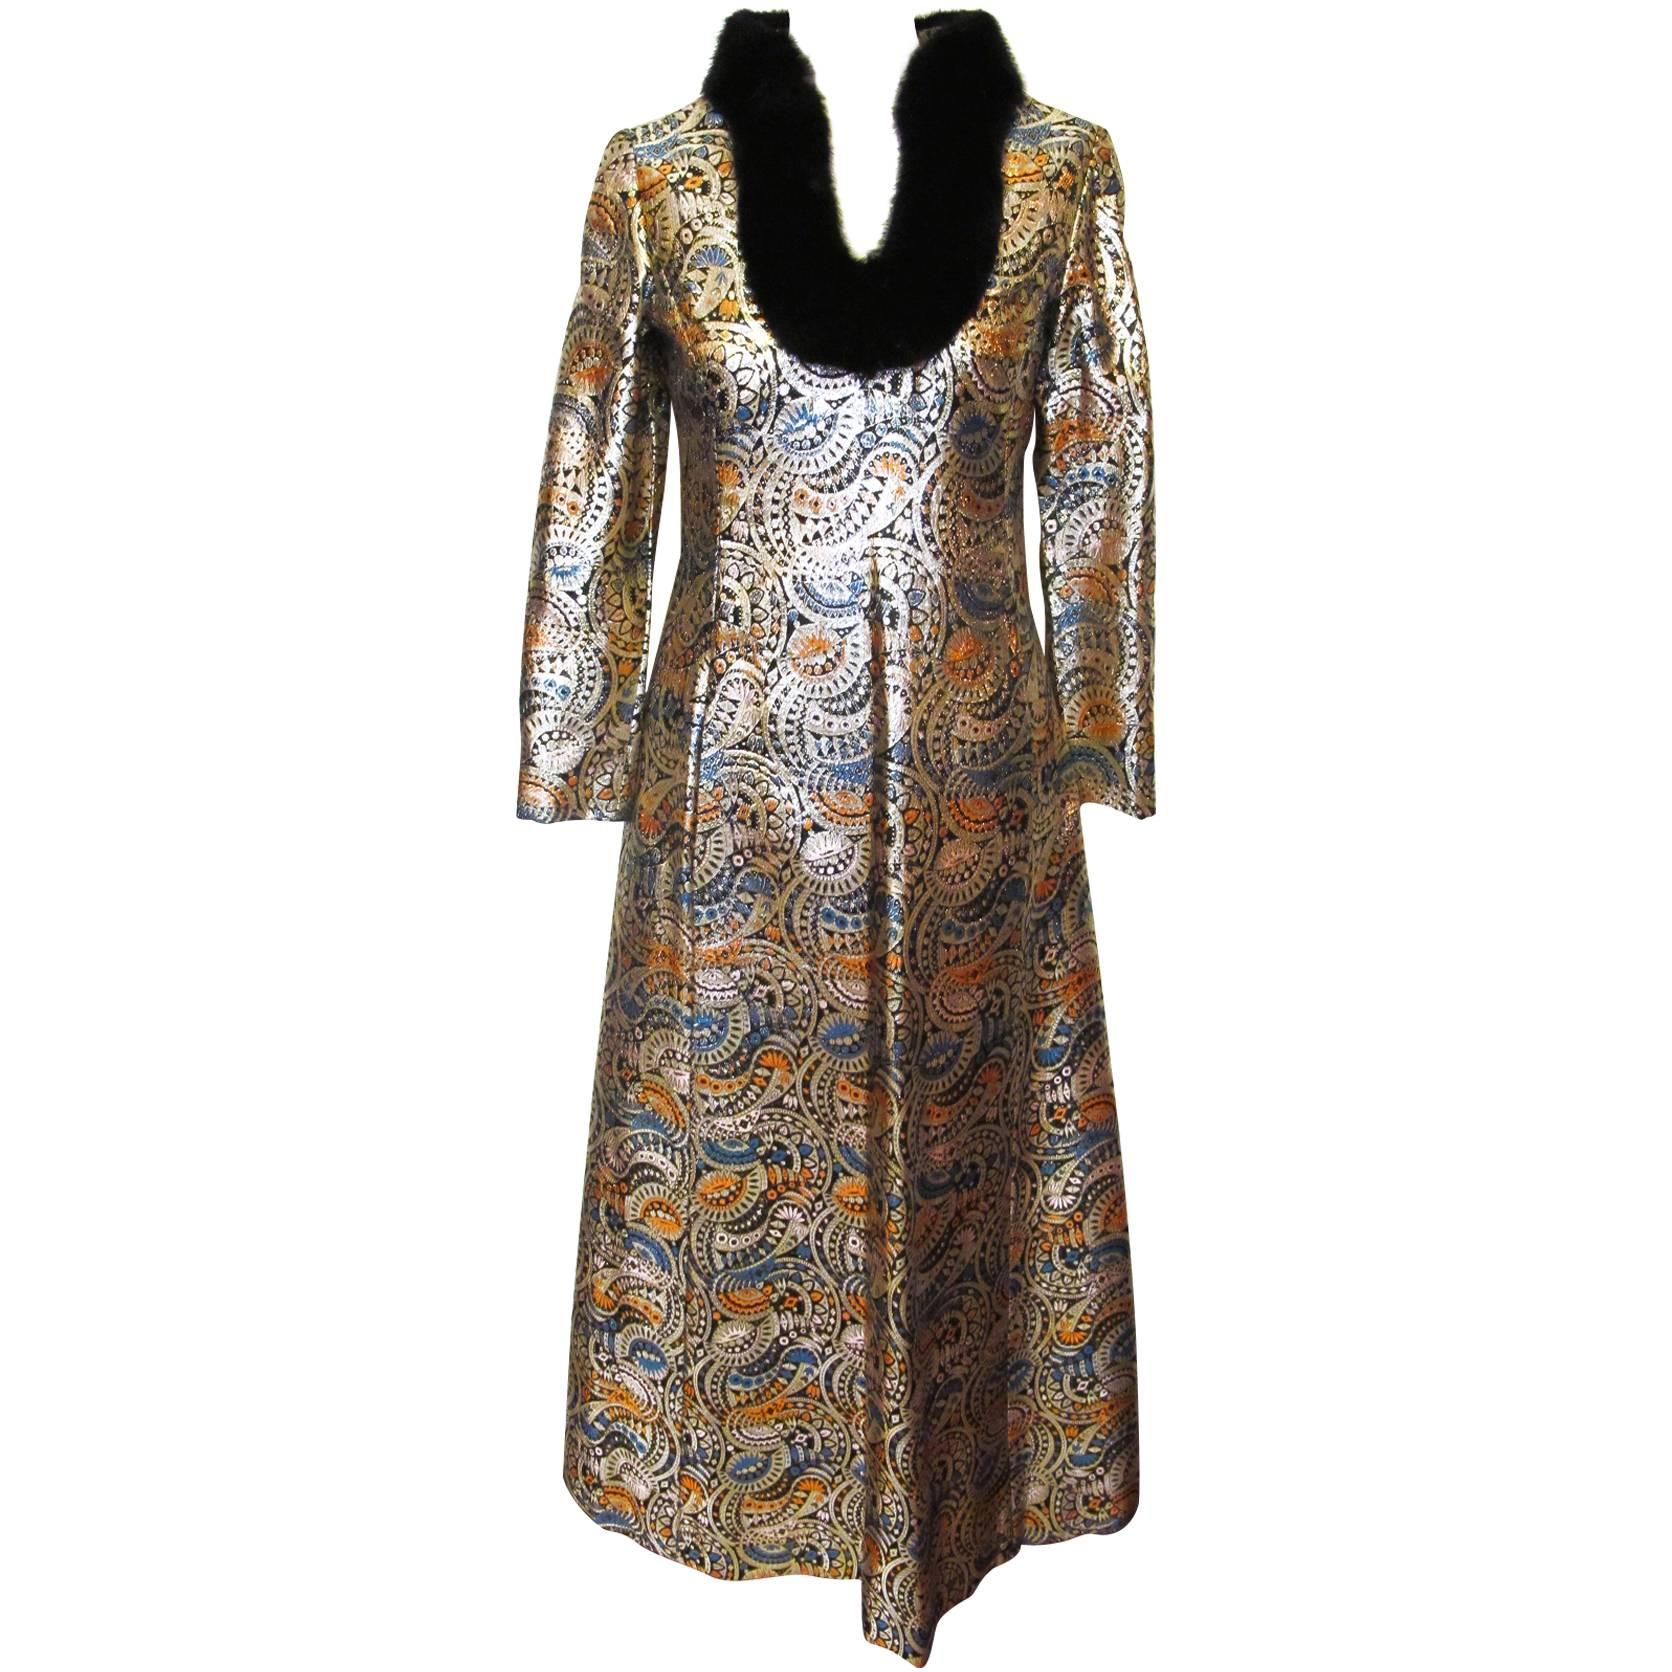 1970's Malcolm Starr Gold Metallic Brocade Evening Gown with Black Mink Trim  For Sale